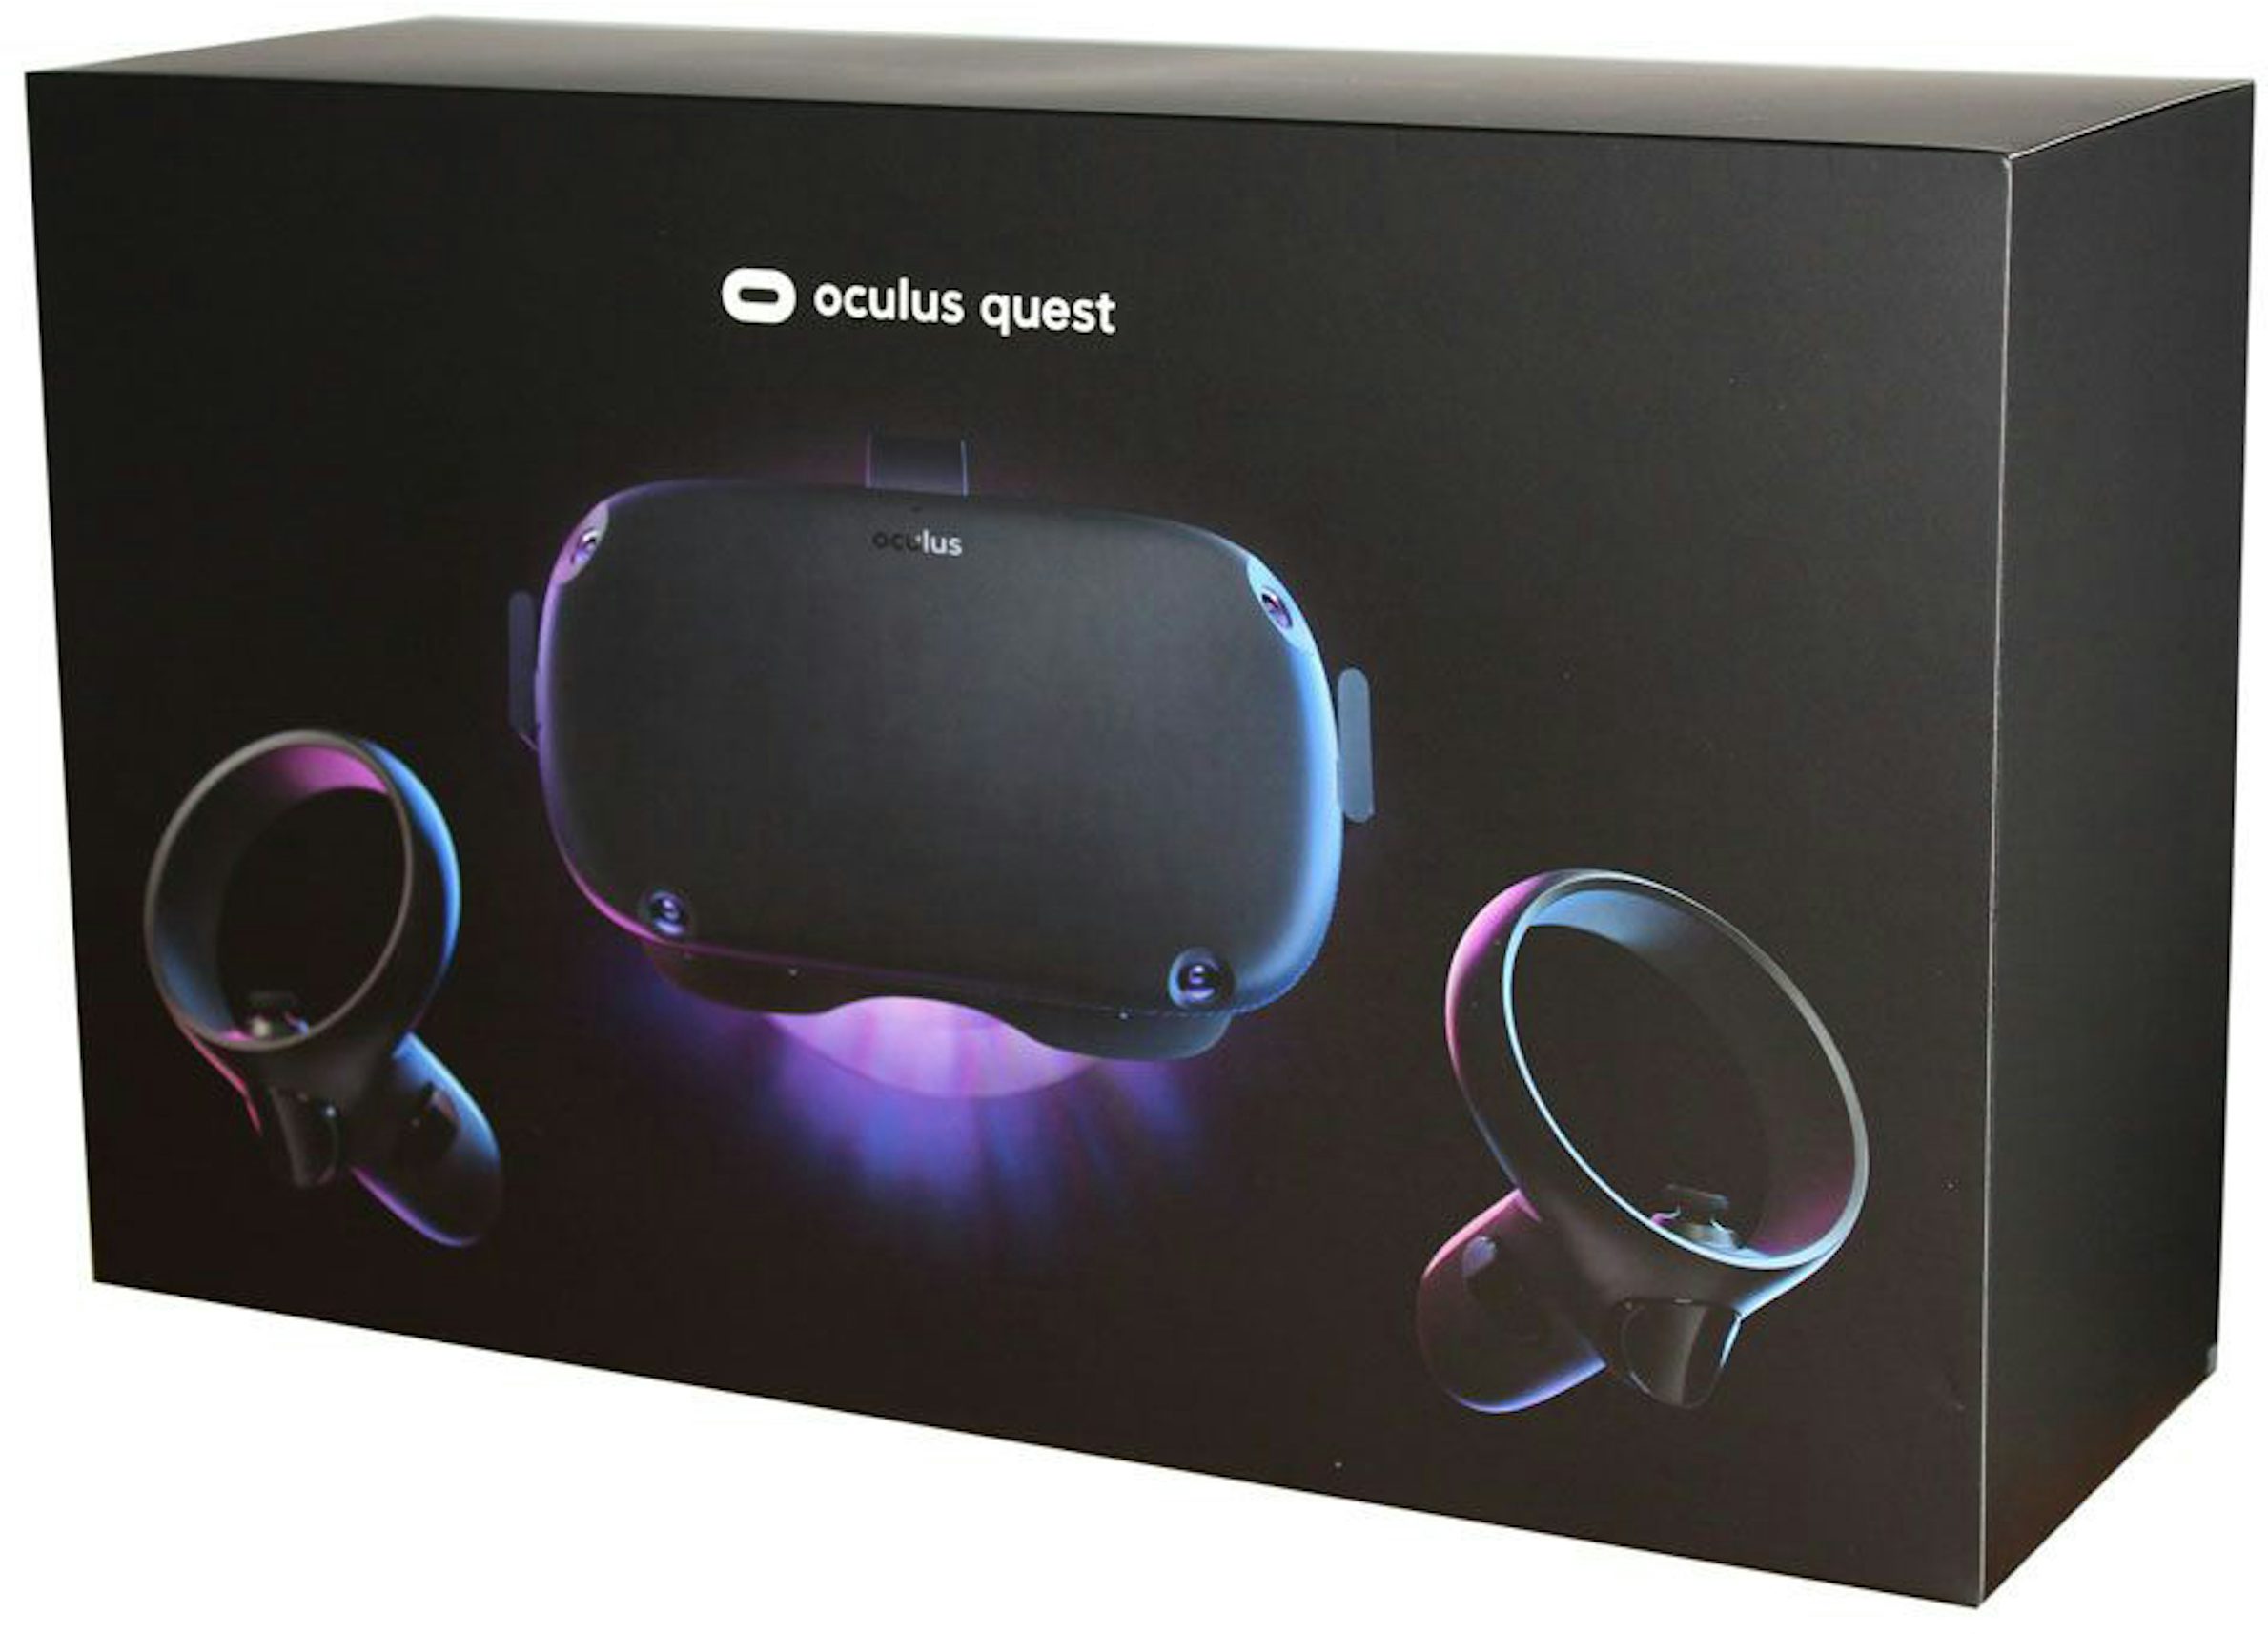 Meta (Oculus) Quest All-In-One VR Headset 64GB Black - US